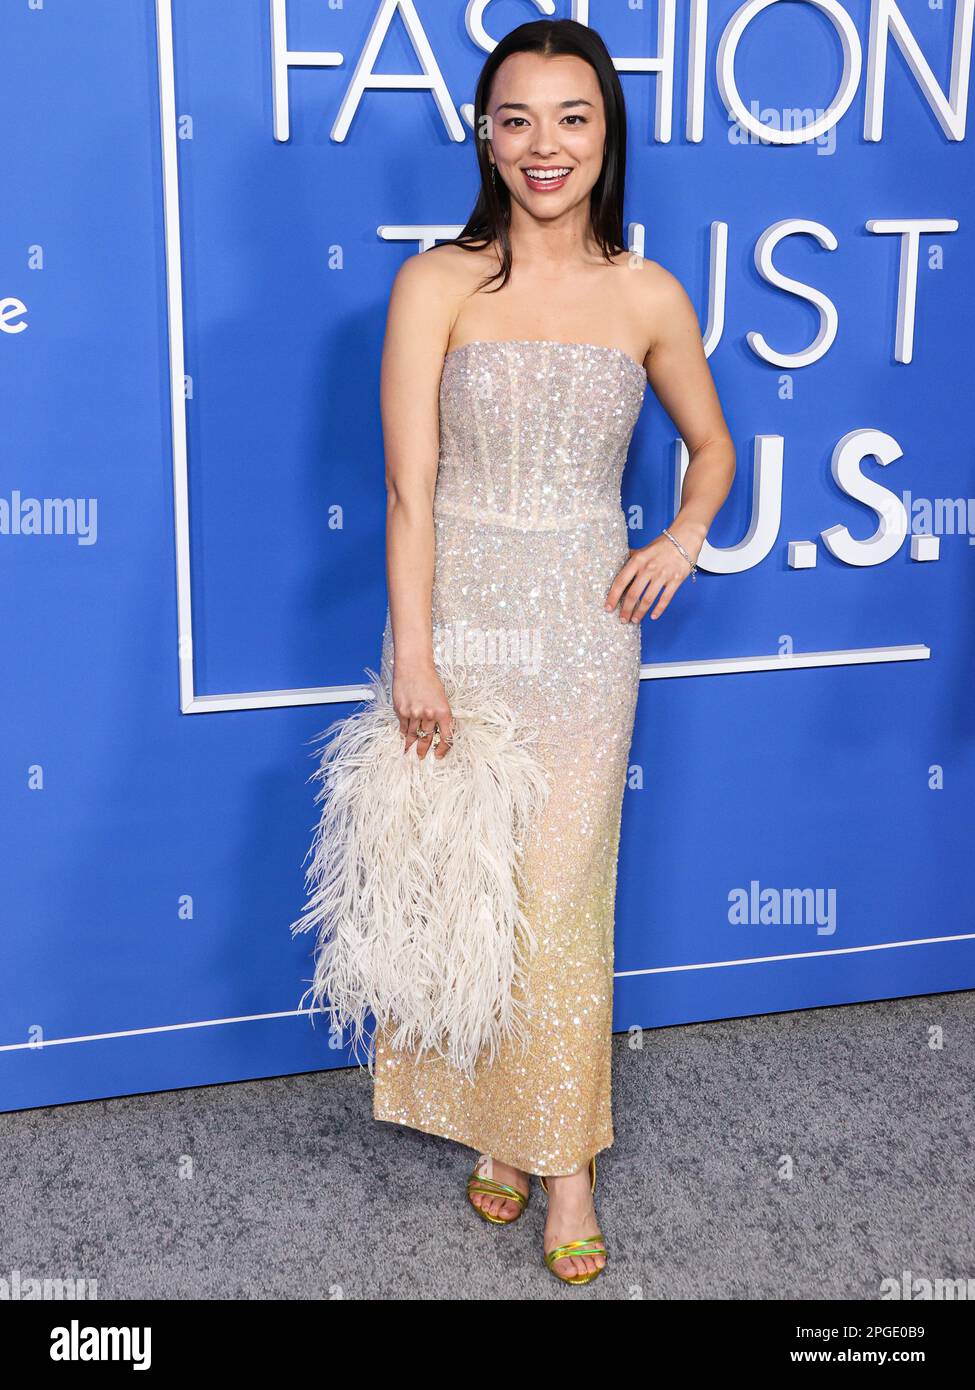 Hollywood, United States. 21st Mar, 2023. HOLLYWOOD, LOS ANGELES, CALIFORNIA, USA - MARCH 21: Midori Francis arrives at the Fashion Trust U.S. Awards 2023 held at Goya Studios on March 21, 2023 in Hollywood, Los Angeles, California, United States. (Photo by Xavier Collin/Image Press Agency) Credit: Image Press Agency/Alamy Live News Stock Photo